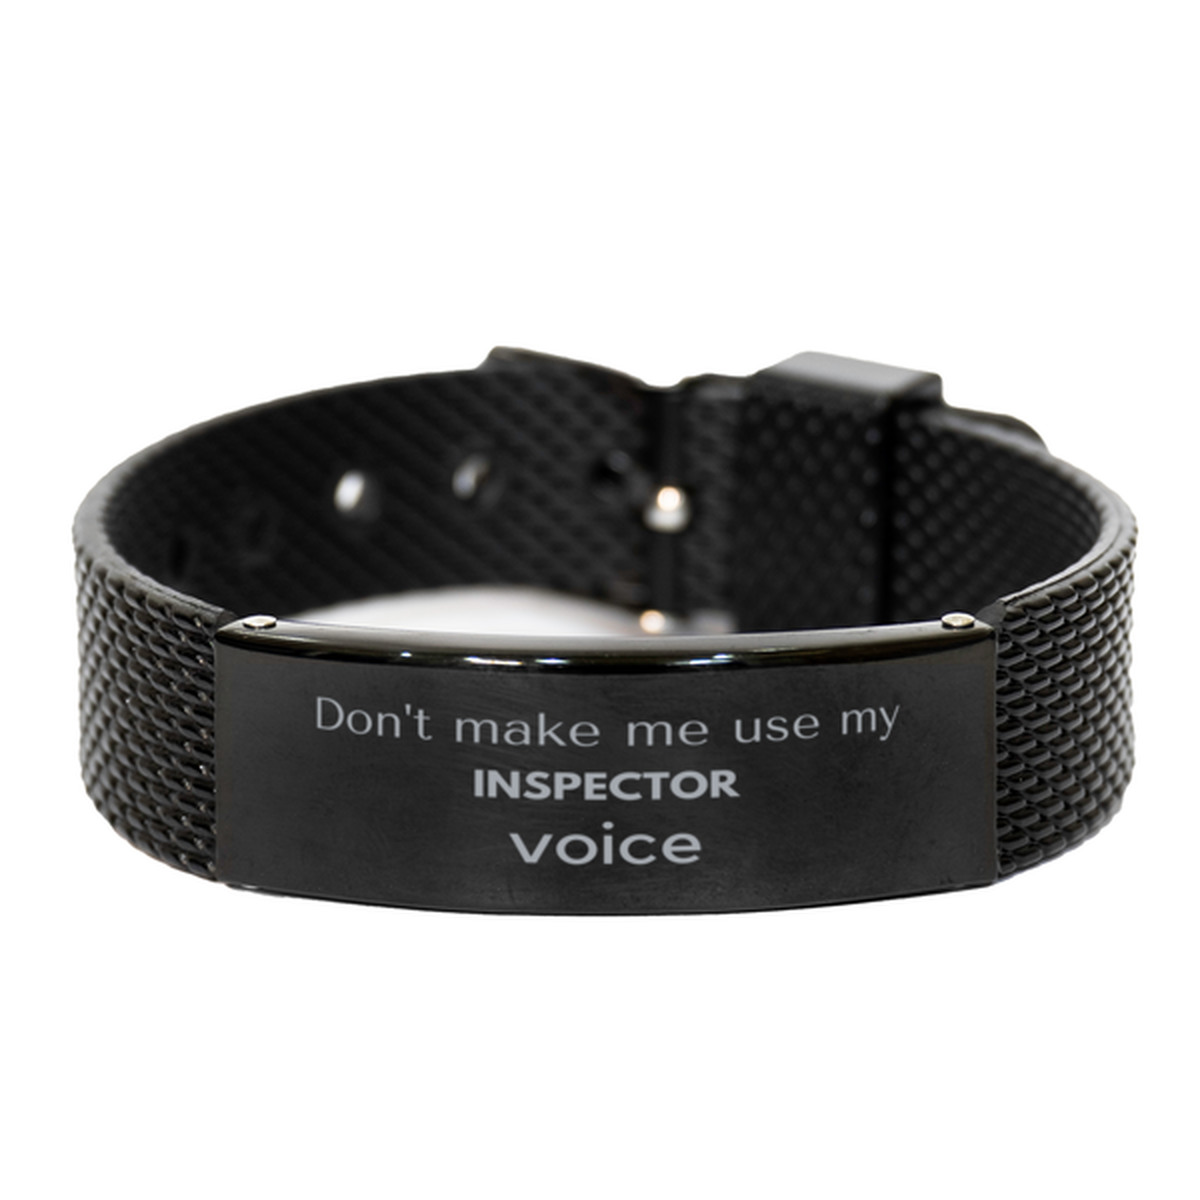 Don't make me use my Inspector voice, Sarcasm Inspector Gifts, Christmas Inspector Black Shark Mesh Bracelet Birthday Unique Gifts For Inspector Coworkers, Men, Women, Colleague, Friends